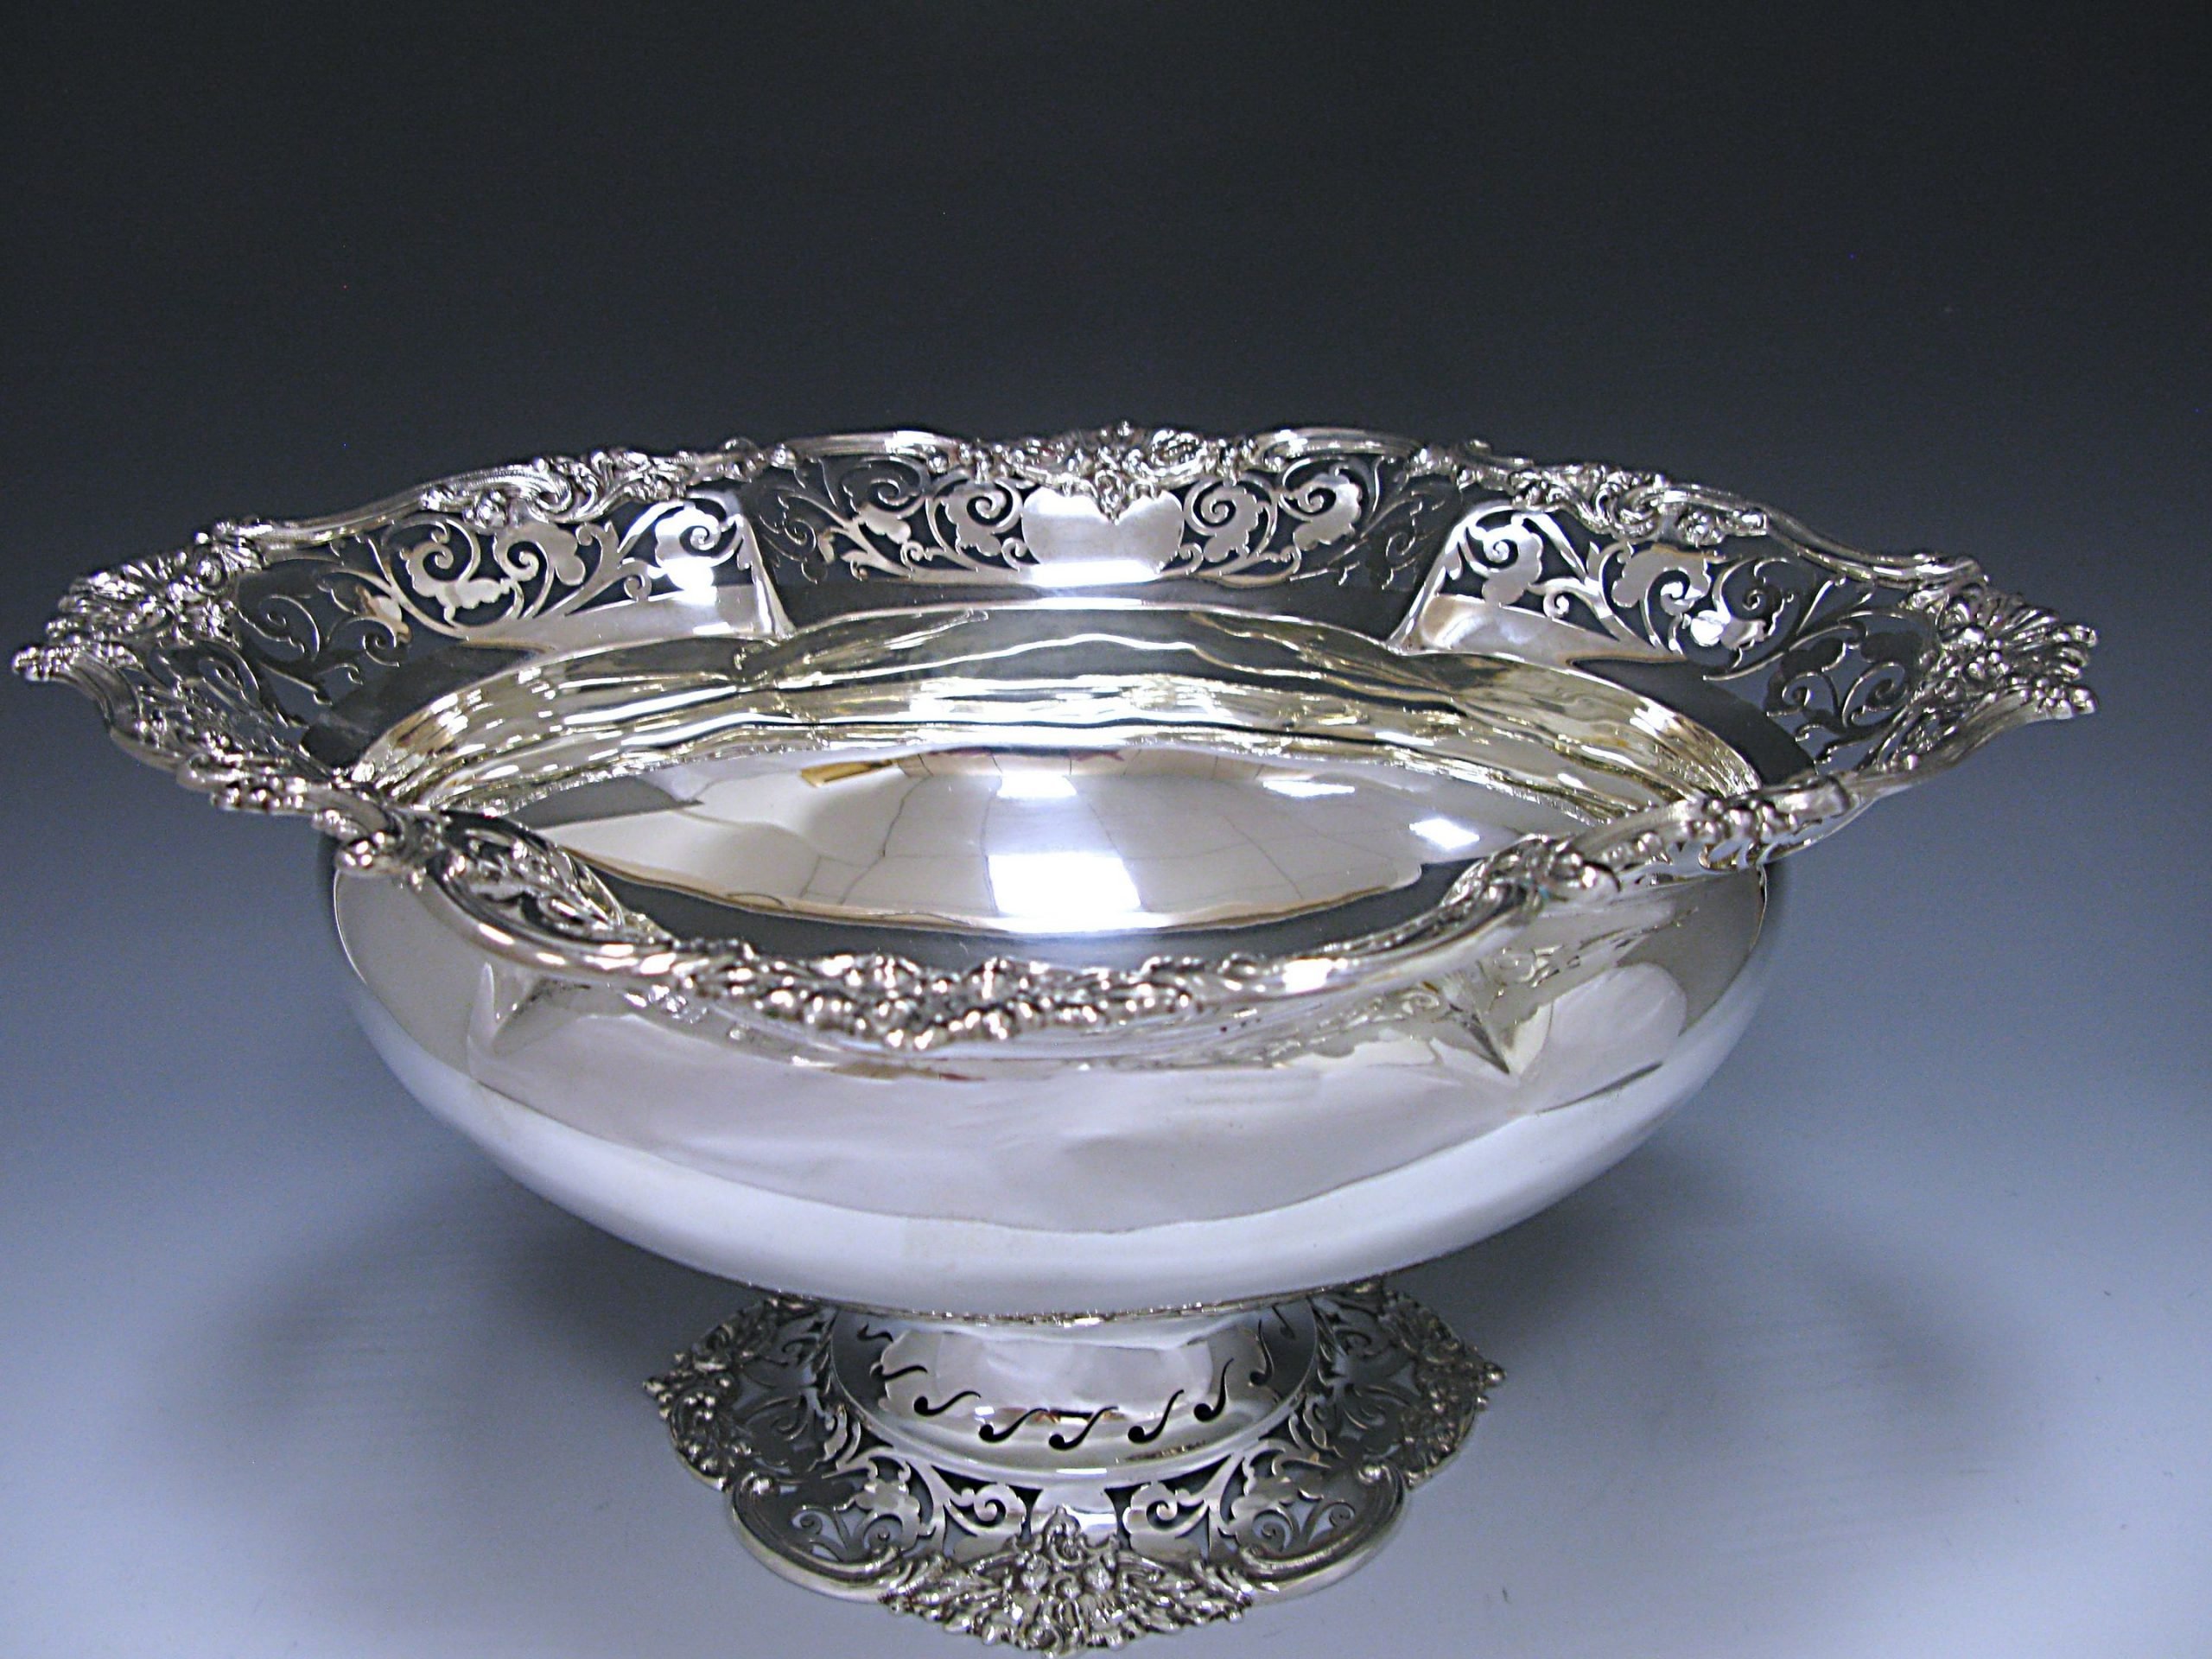 An Edwardian Antique Sterling Silver Bowl 1